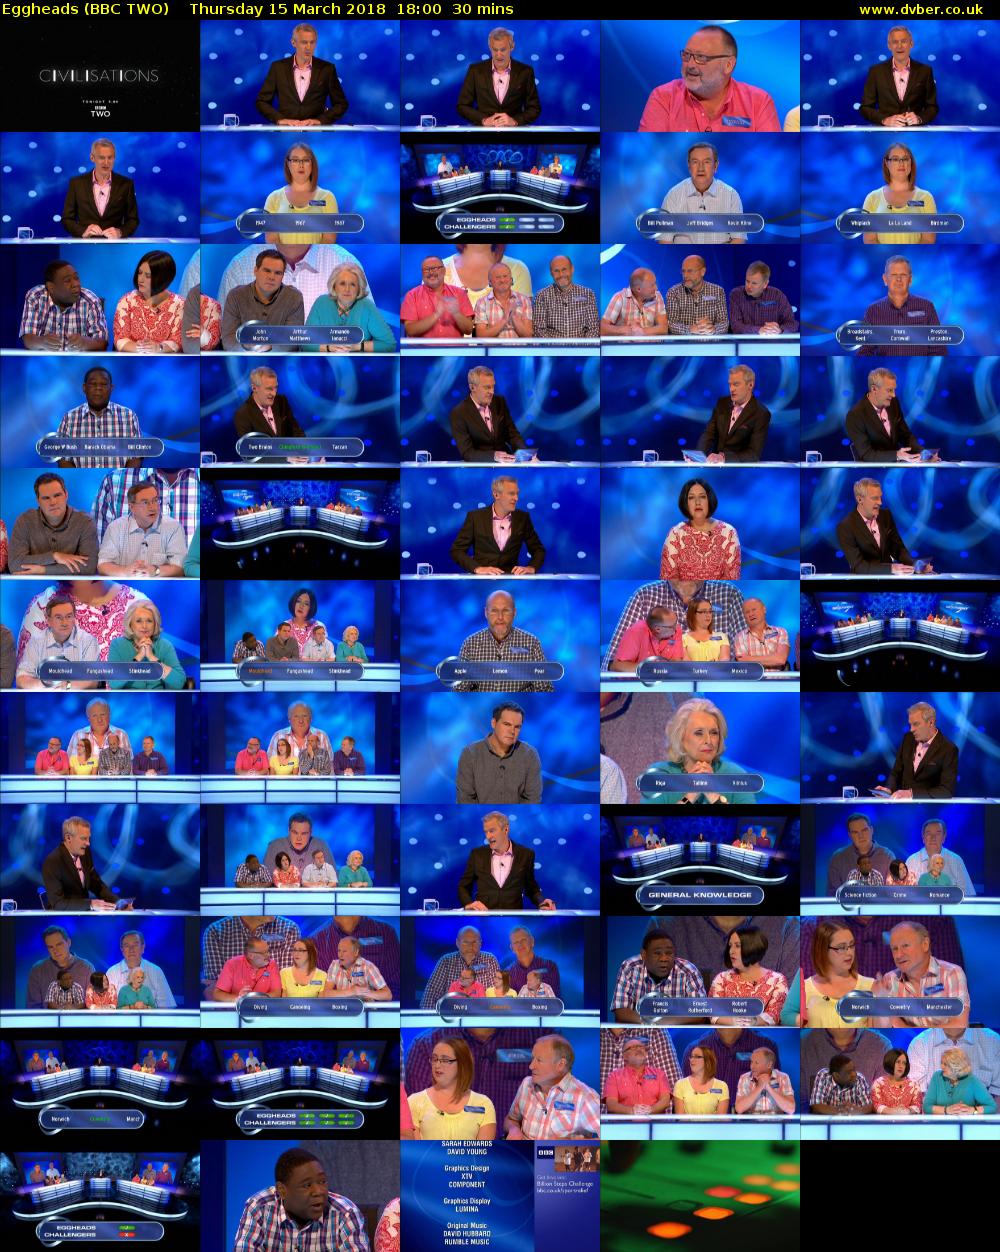 Eggheads (BBC TWO) Thursday 15 March 2018 18:00 - 18:30